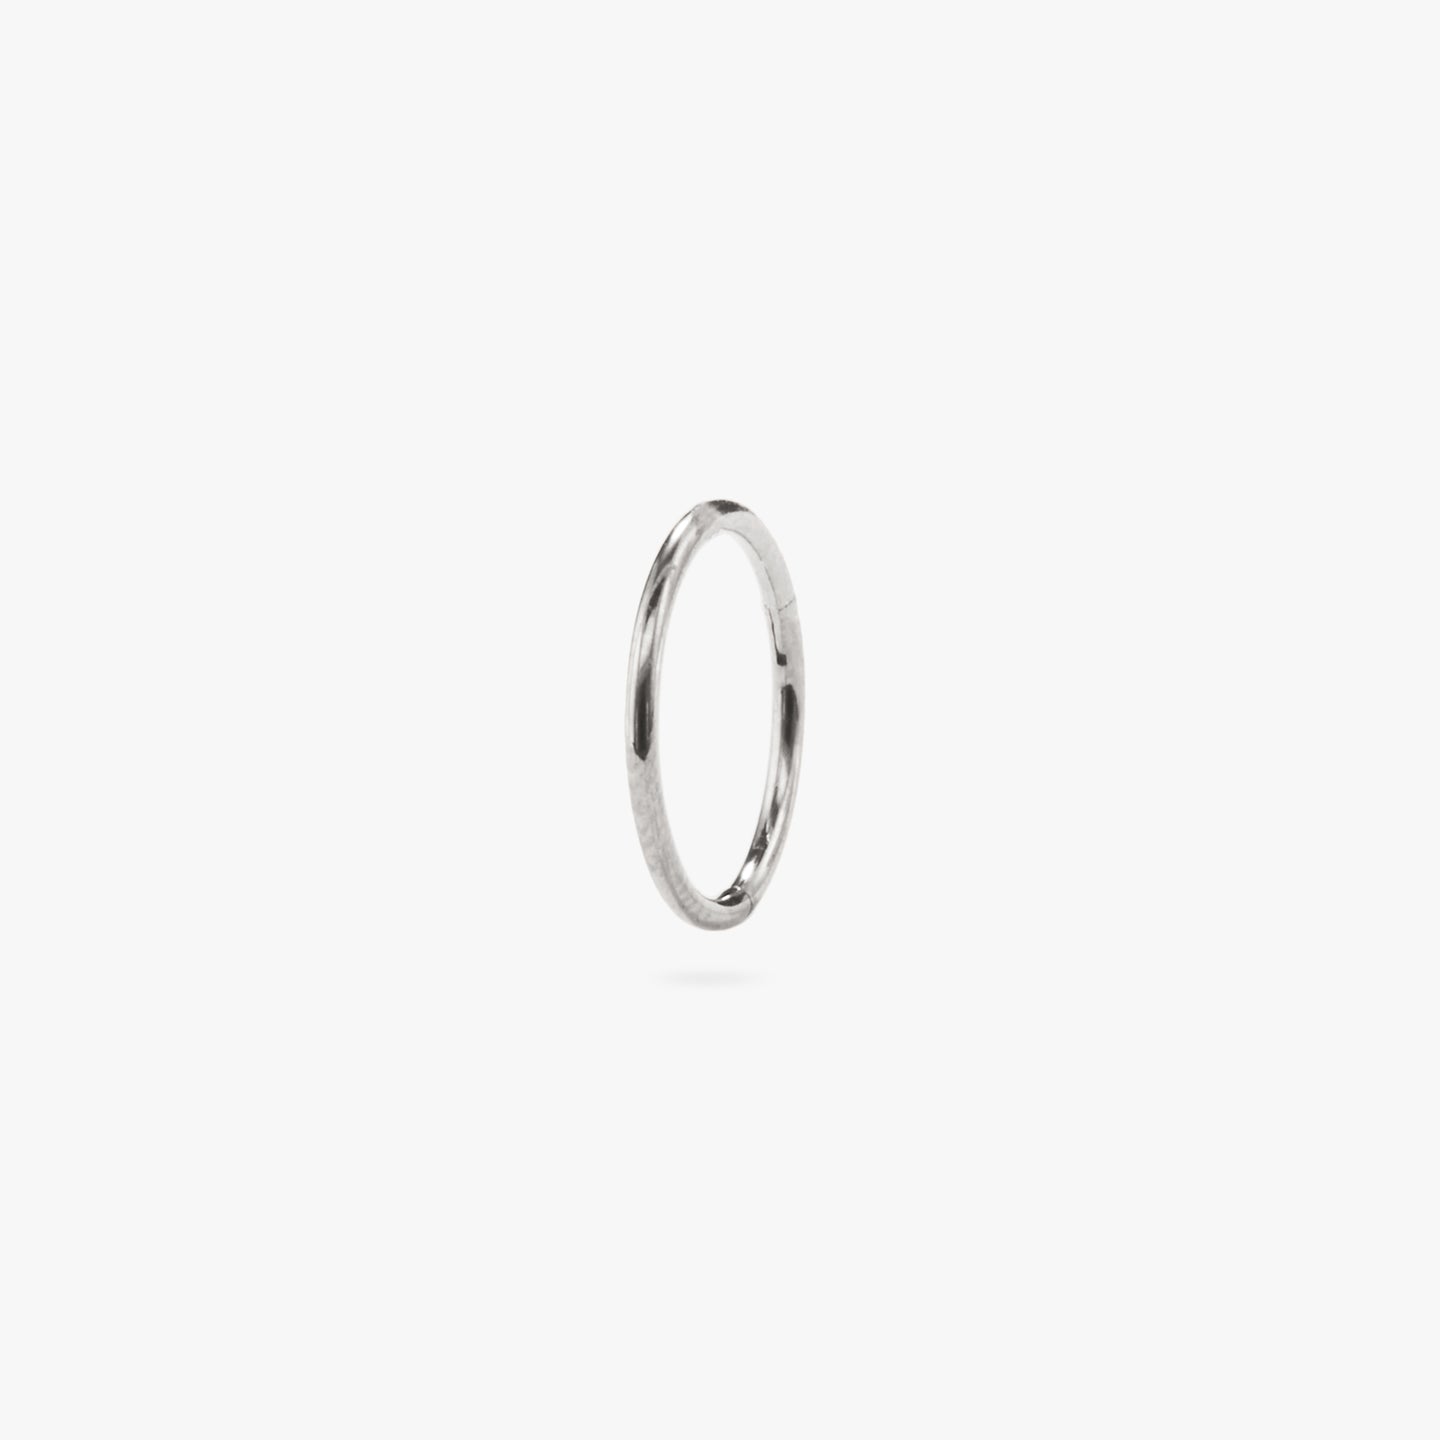 This is a clicker earring color:null|silver